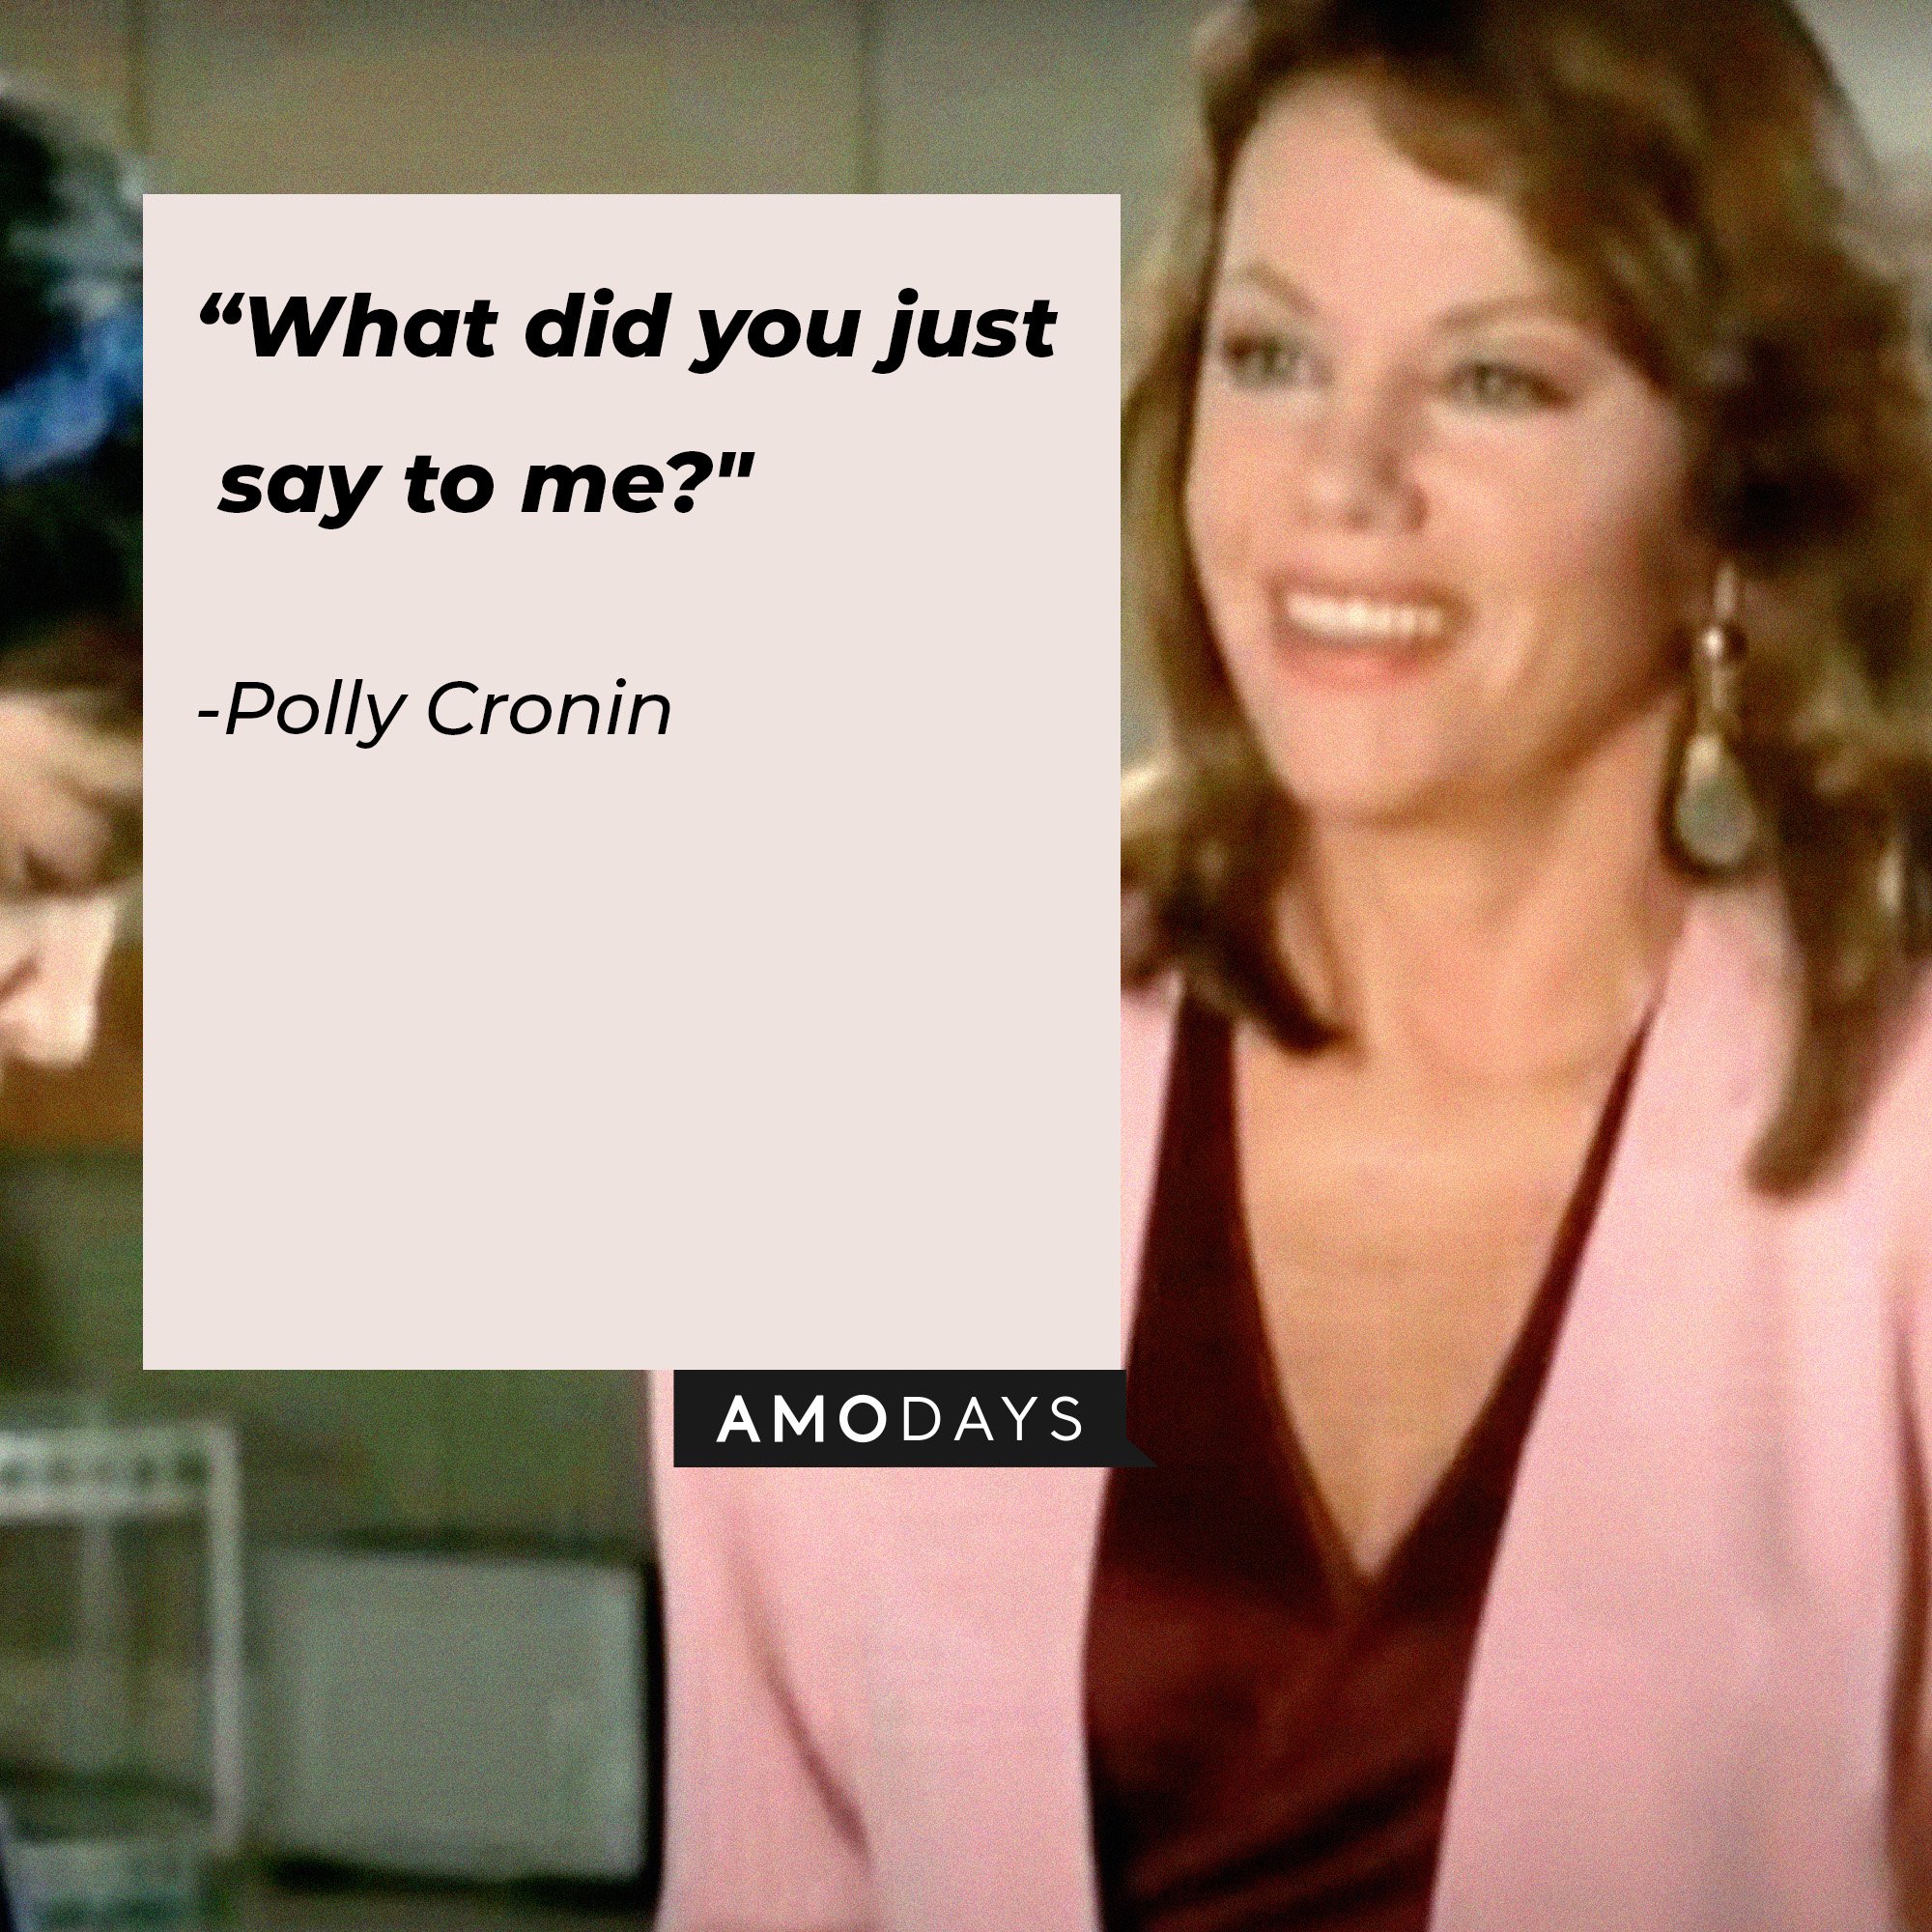  Polly Cronin’s quote: "What did you just say to me?" | Image: AmoDays